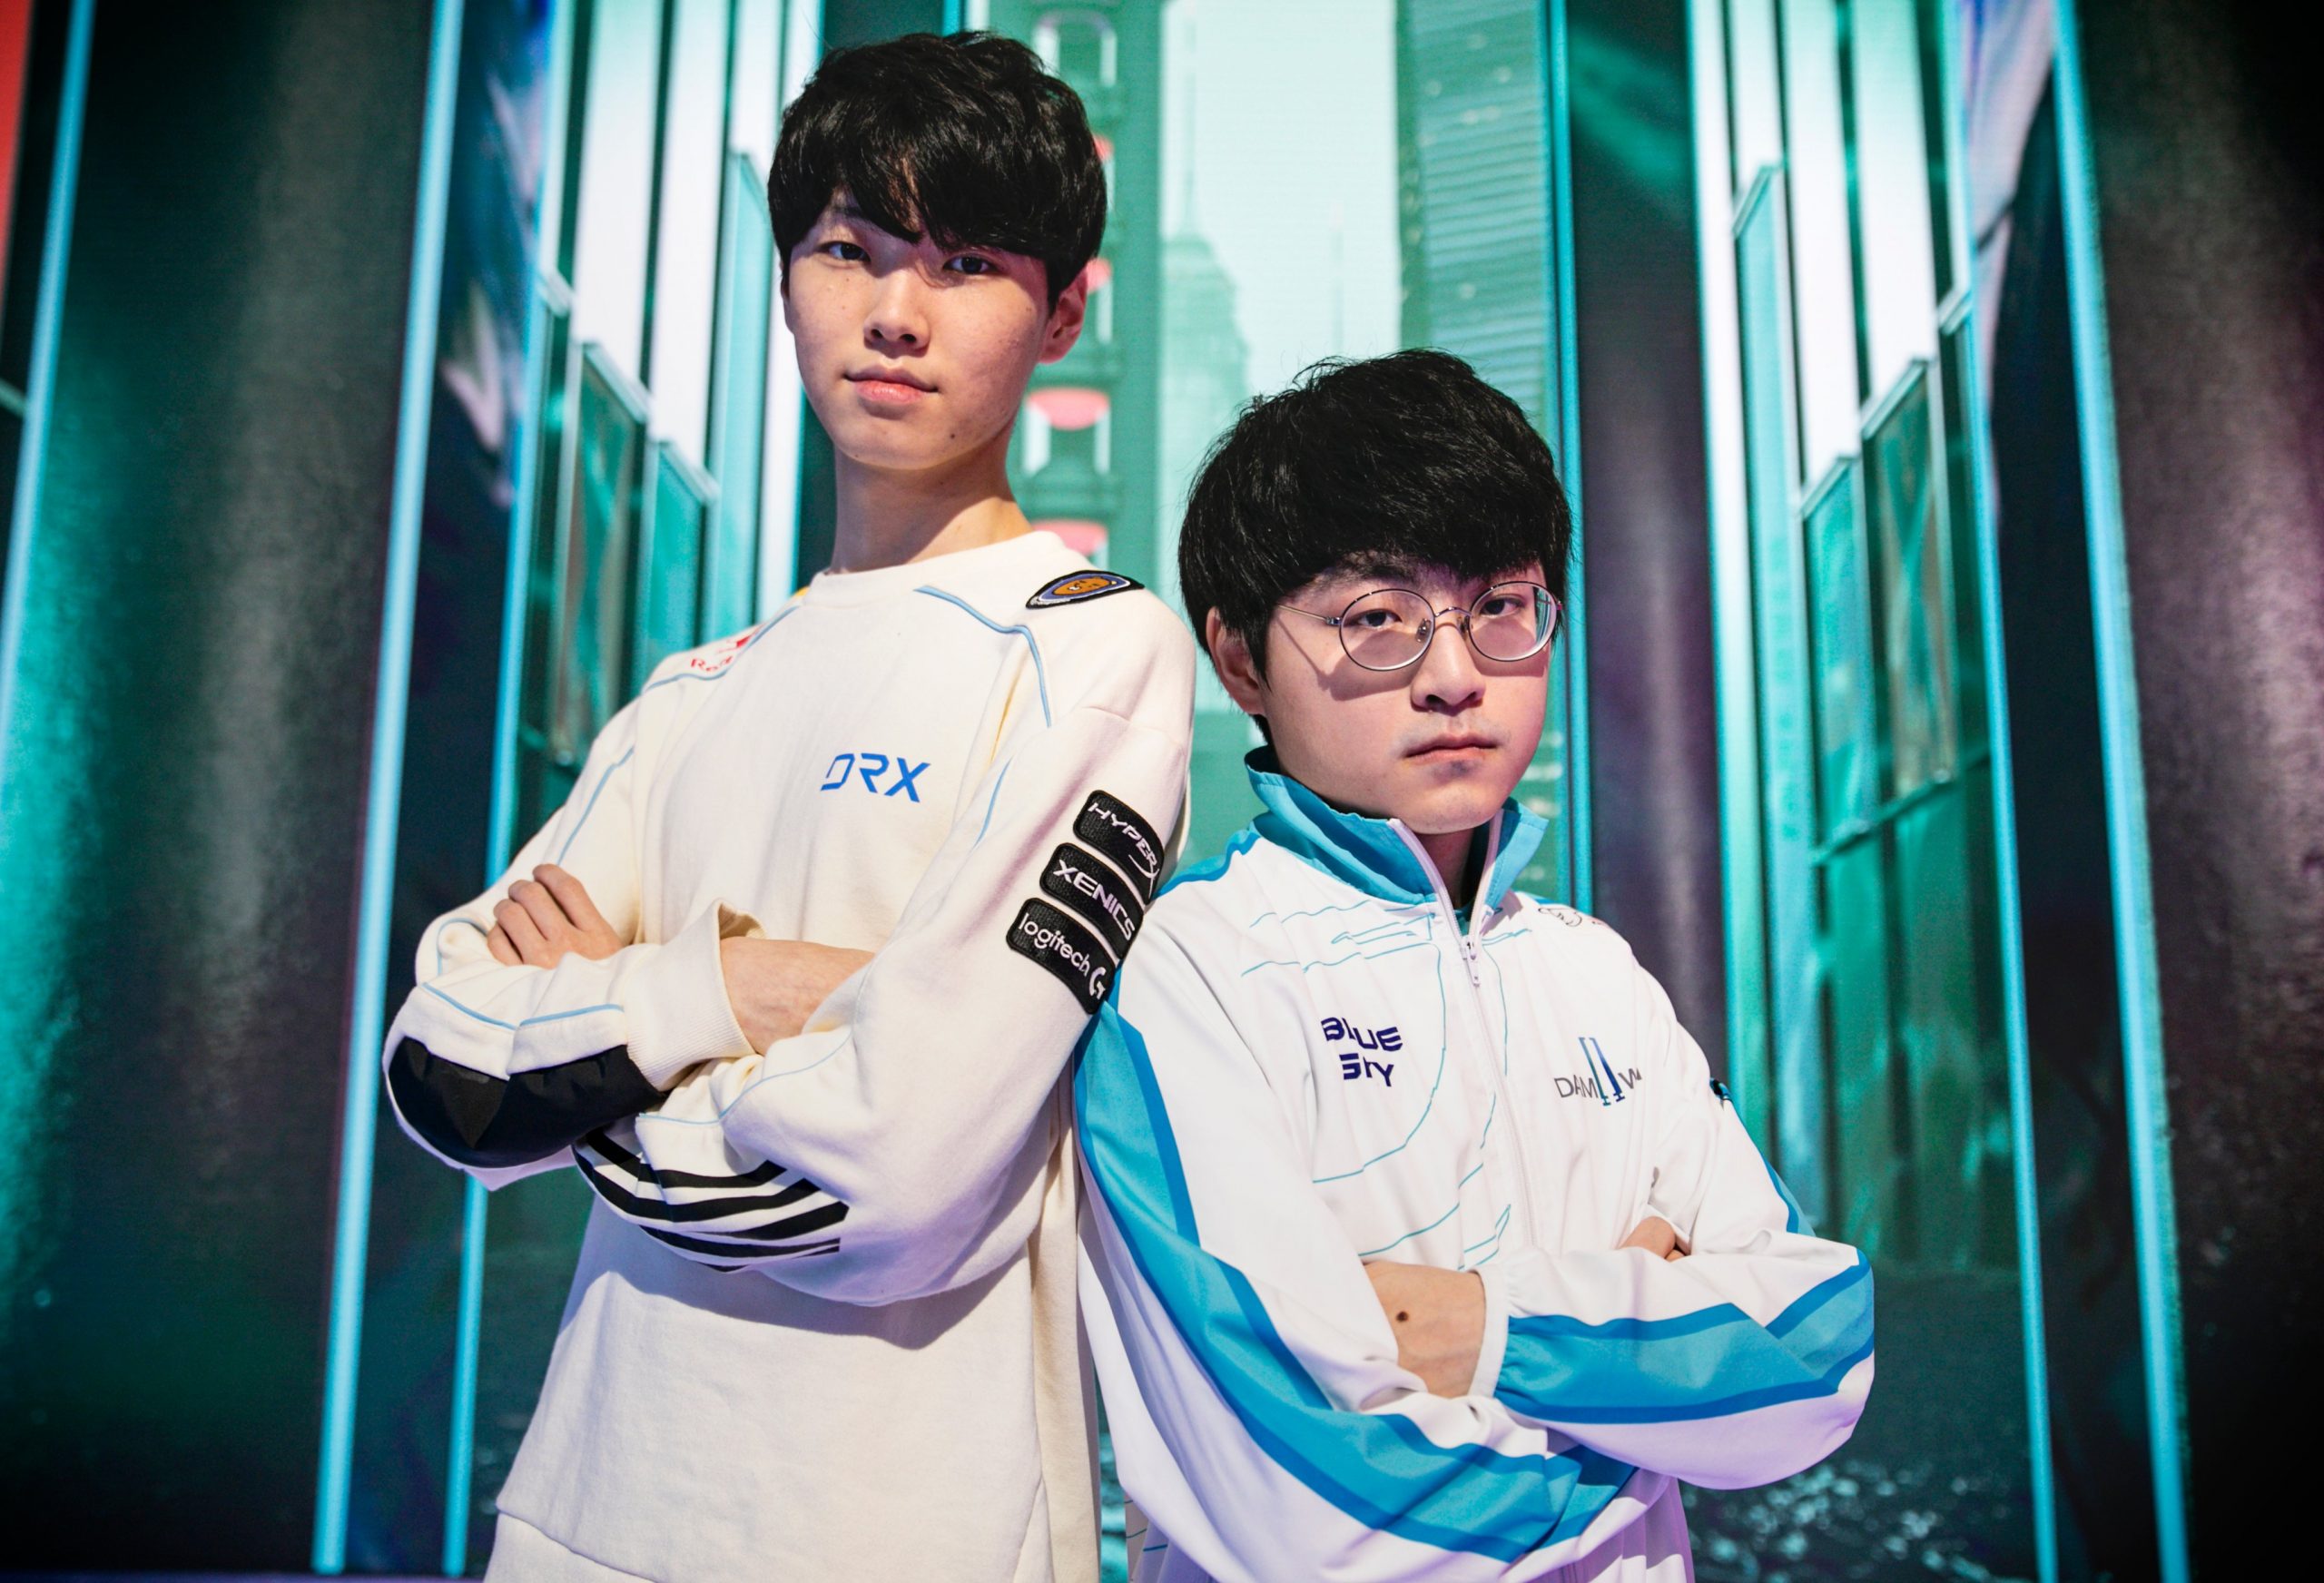 The Worlds 2020 quarter-finals kicked off with a bang as Damwon Gaming eliminated DRX from the tournament